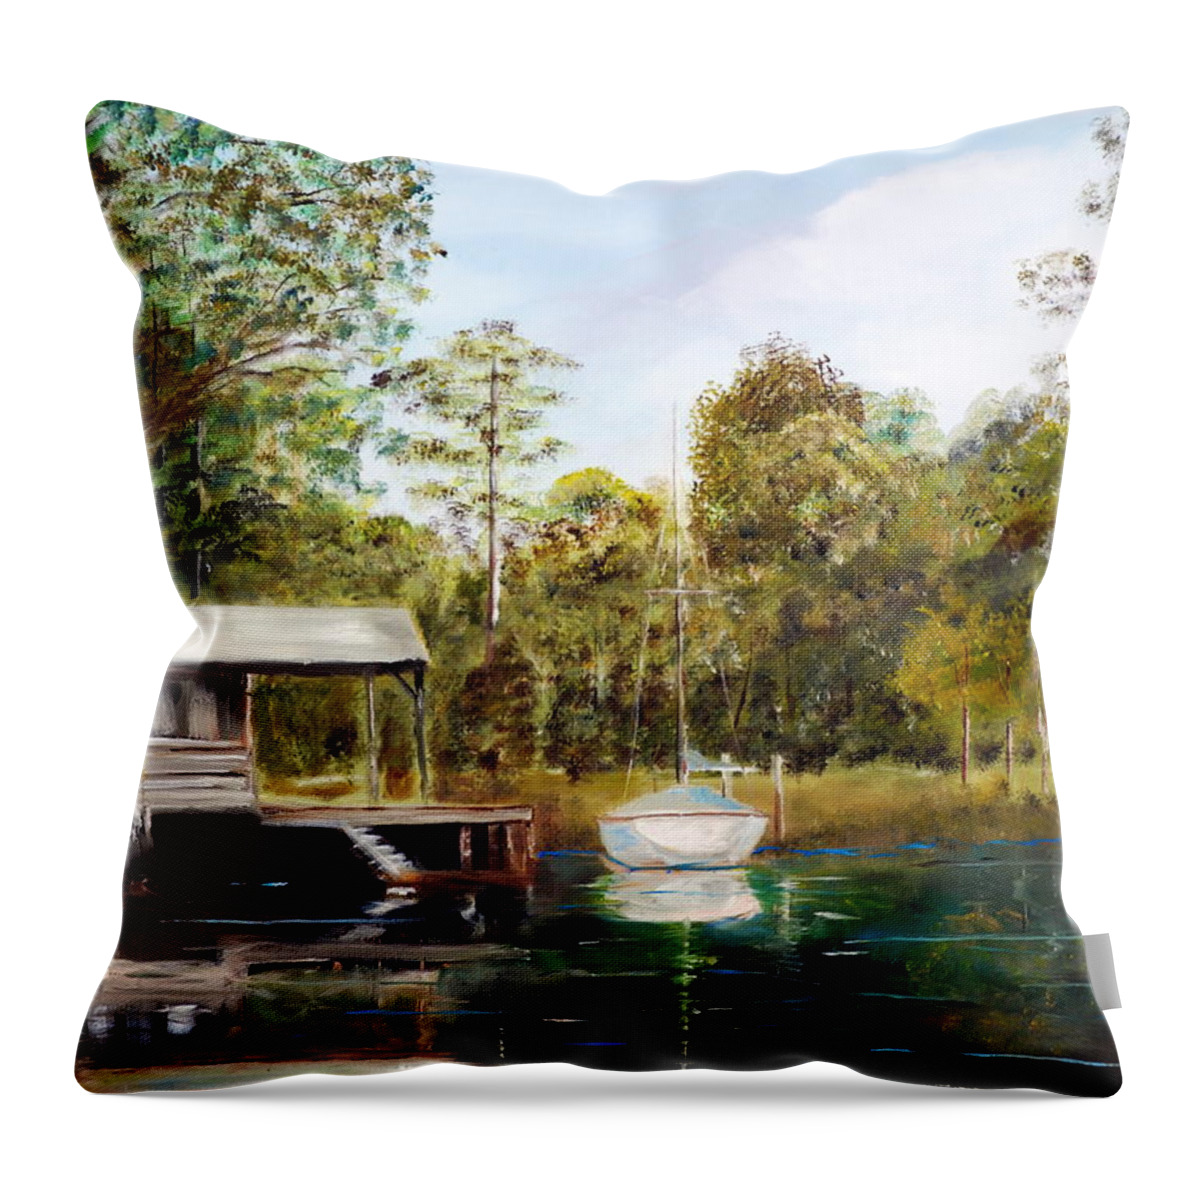 Plein Air Throw Pillow featuring the painting Waccamaw River Sloop by Phil Burton